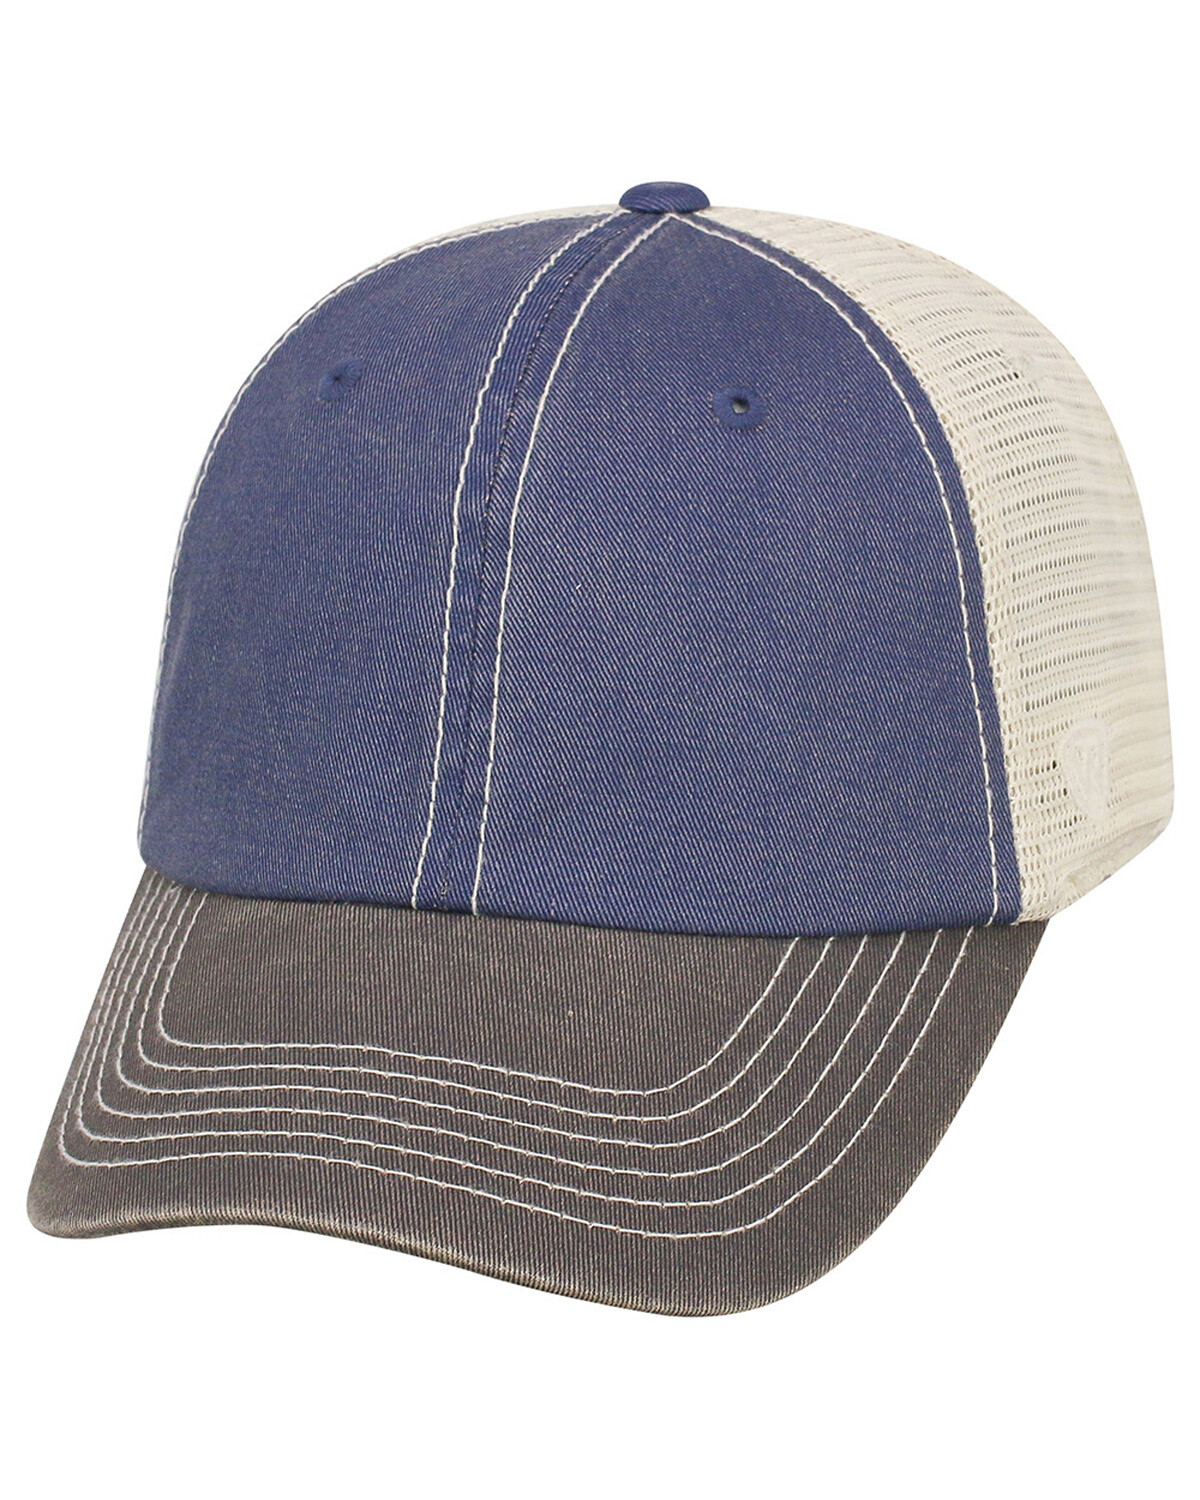 Top Of The World Adult Offroad Cap PURPLE